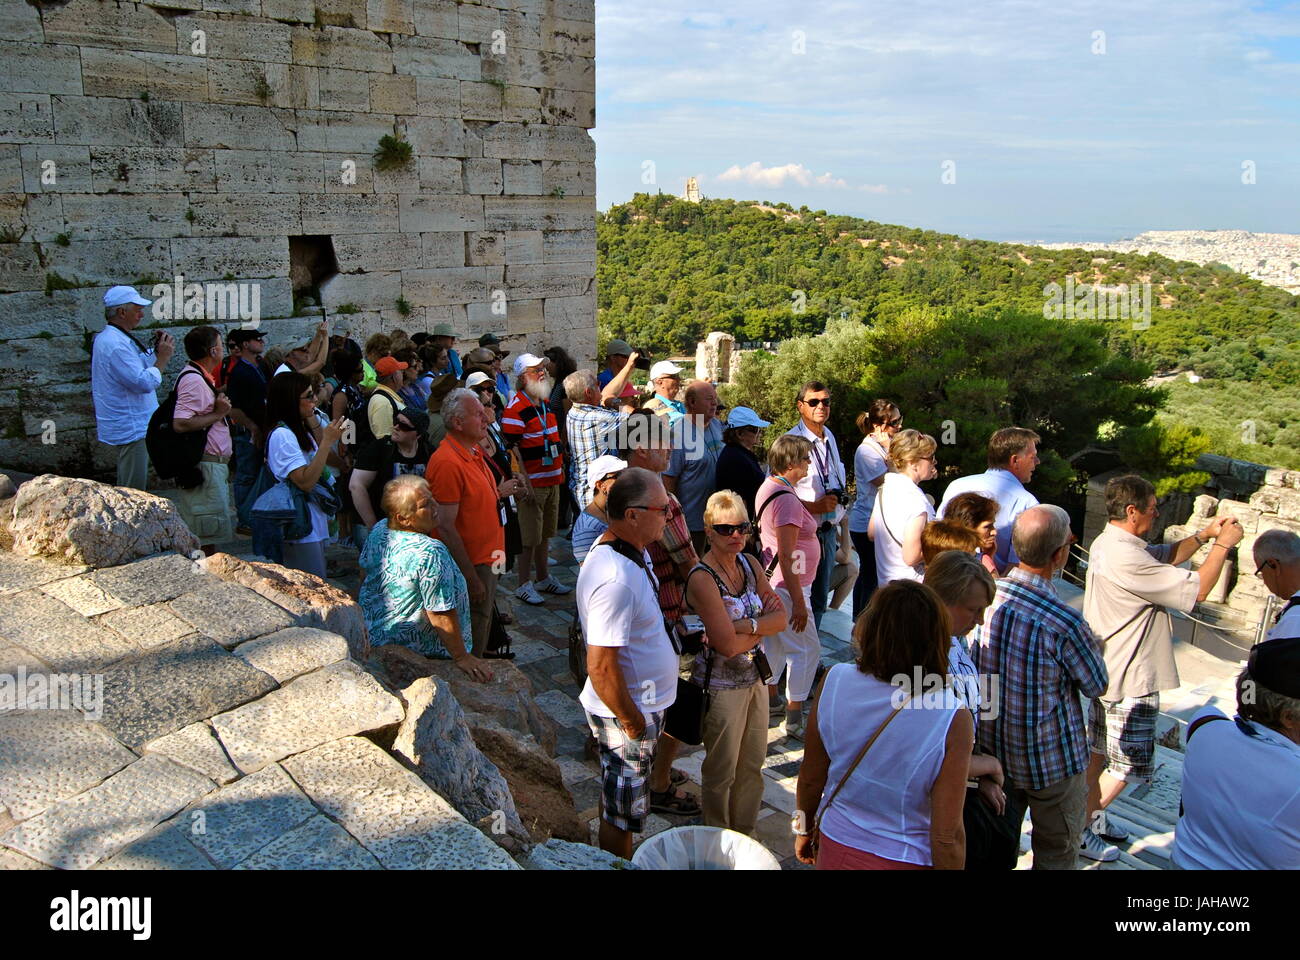 Crowds of tourists at the Acropolis, Athens, Greece Stock Photo